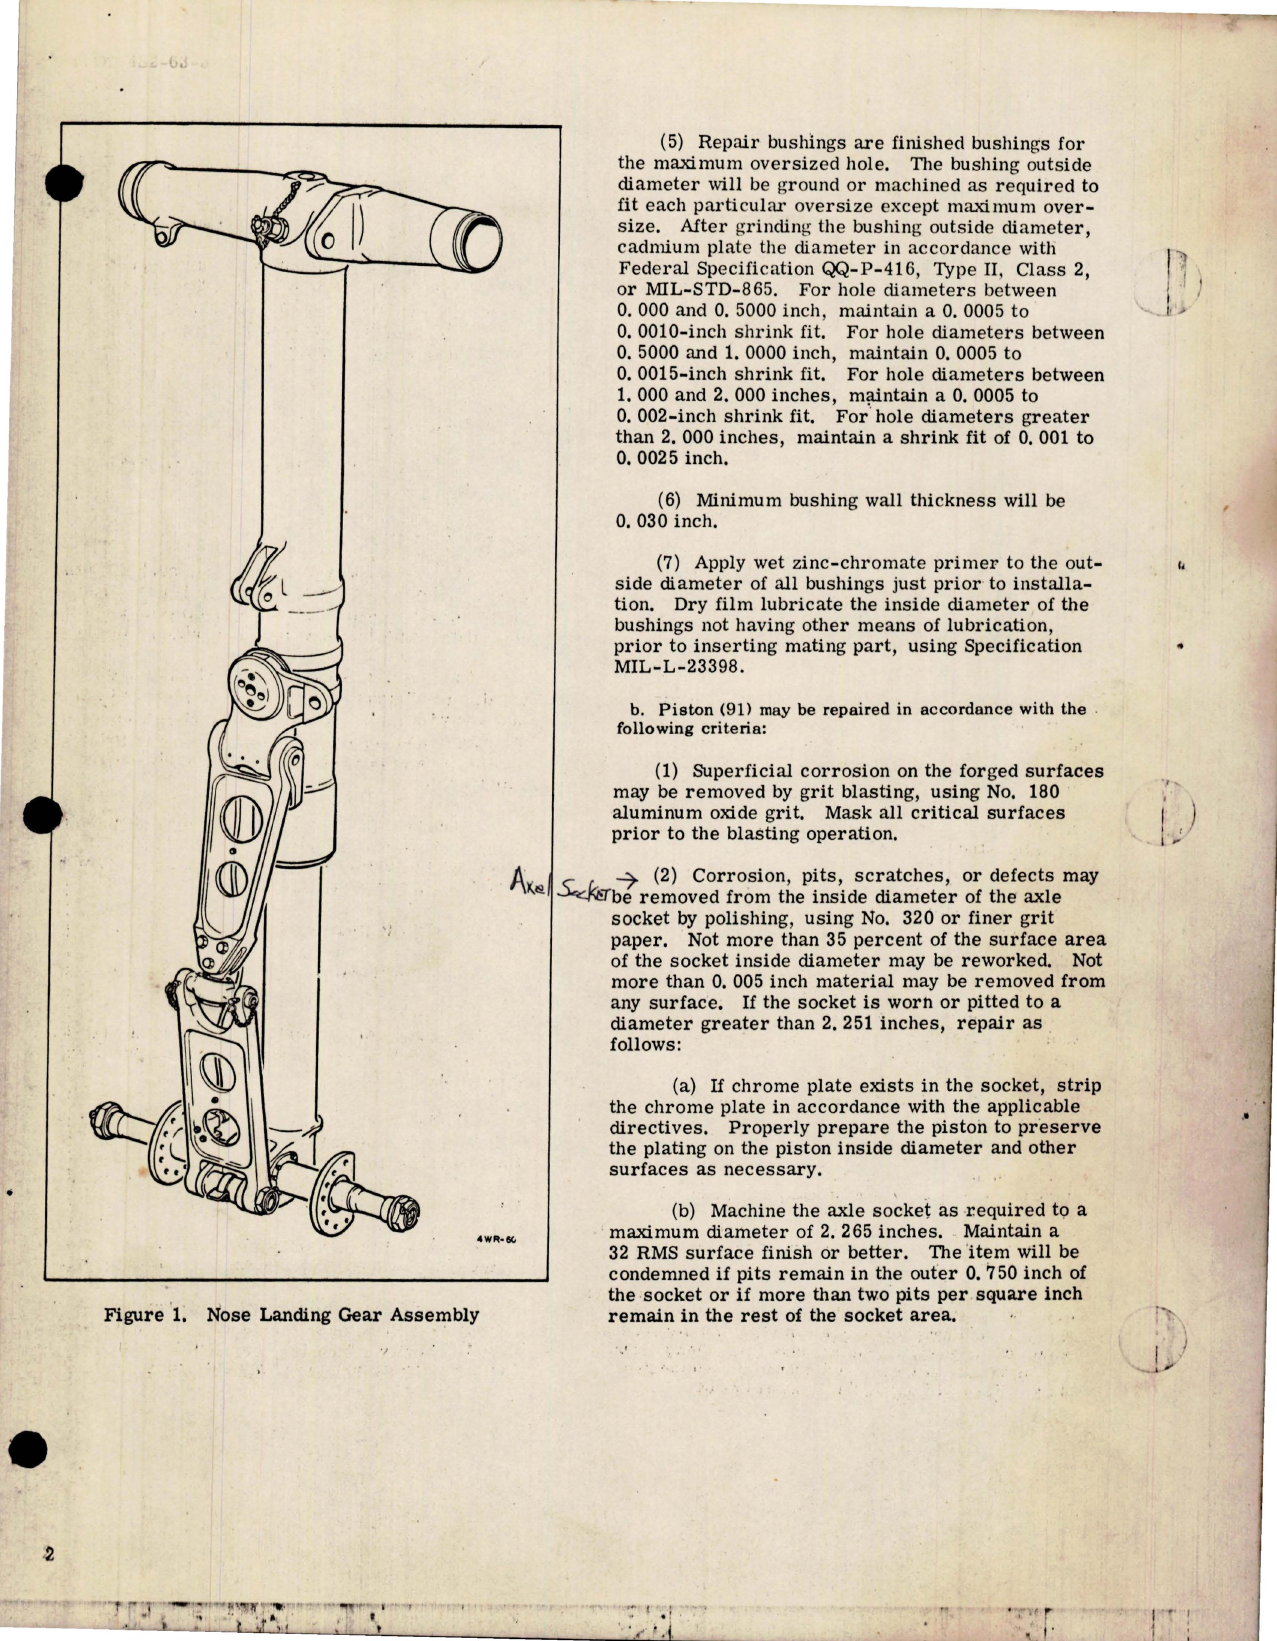 Sample page 5 from AirCorps Library document: Overhaul Instructions with Parts for Nose Landing Gear Assembly - Part 5100 Series